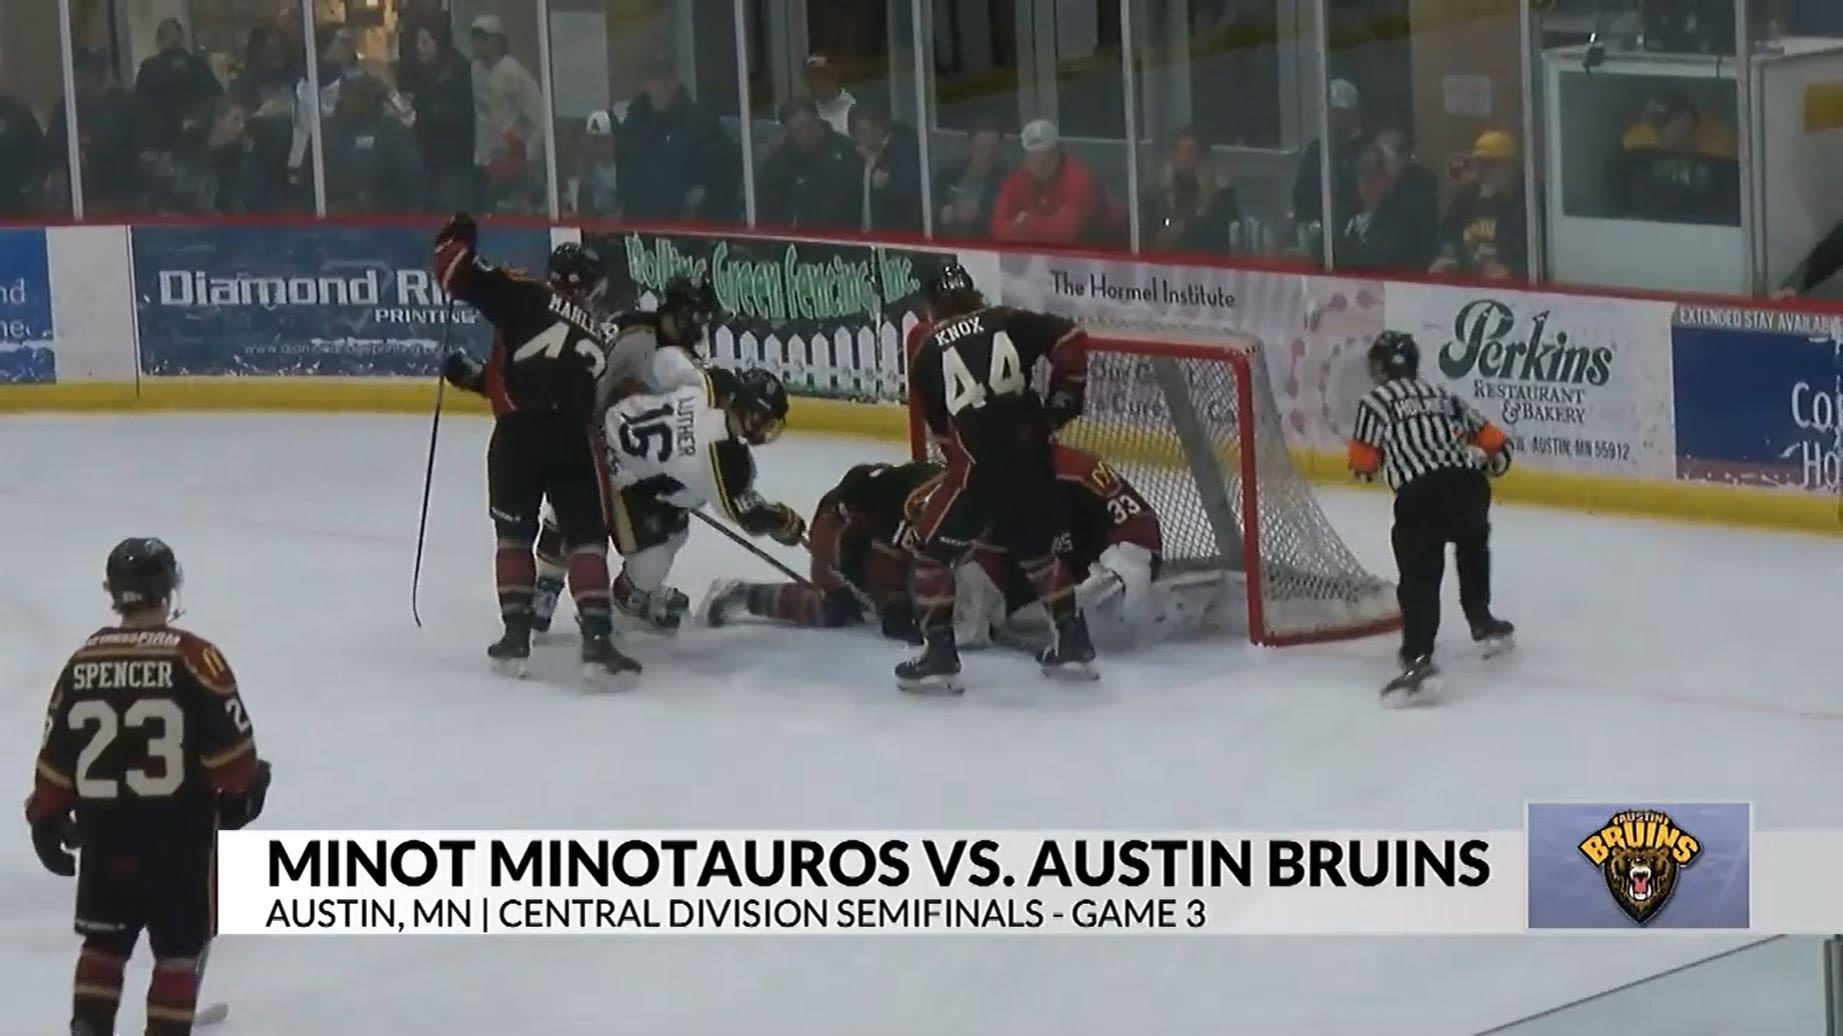 Austin Bruins' playoff run ends in a series sweep by Minot at home